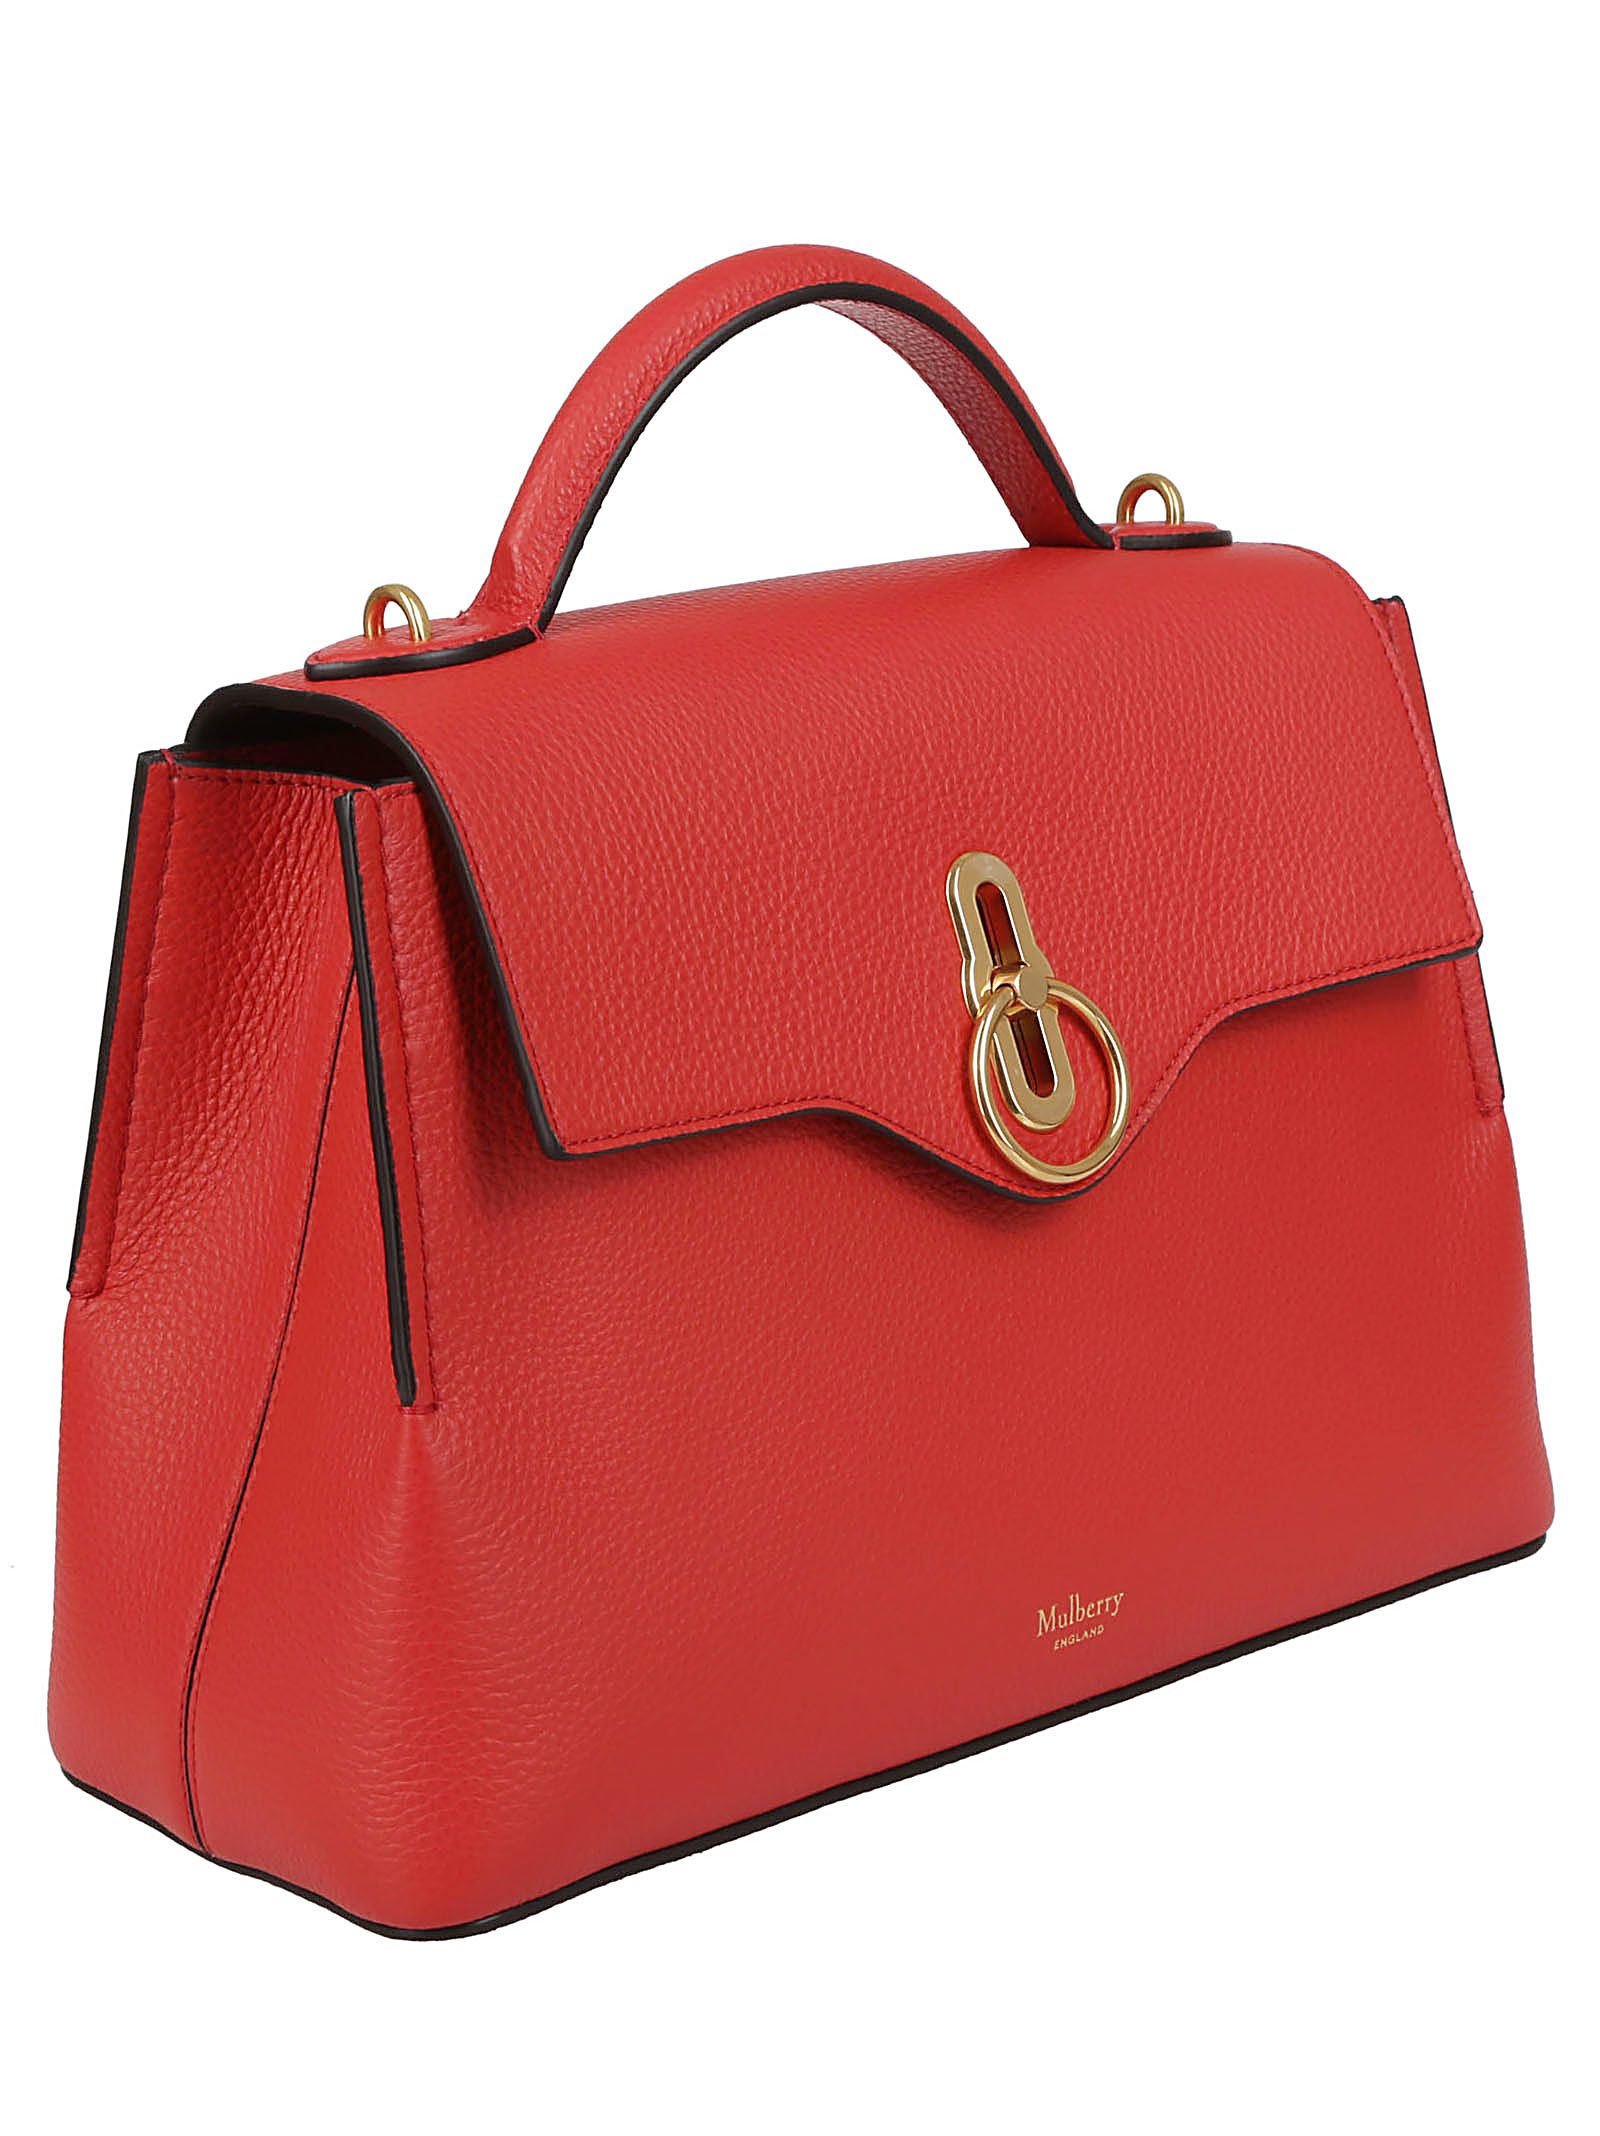 Mulberry Mulberry Seaton Small Shoulder Bag - Red - 10888317 | italist